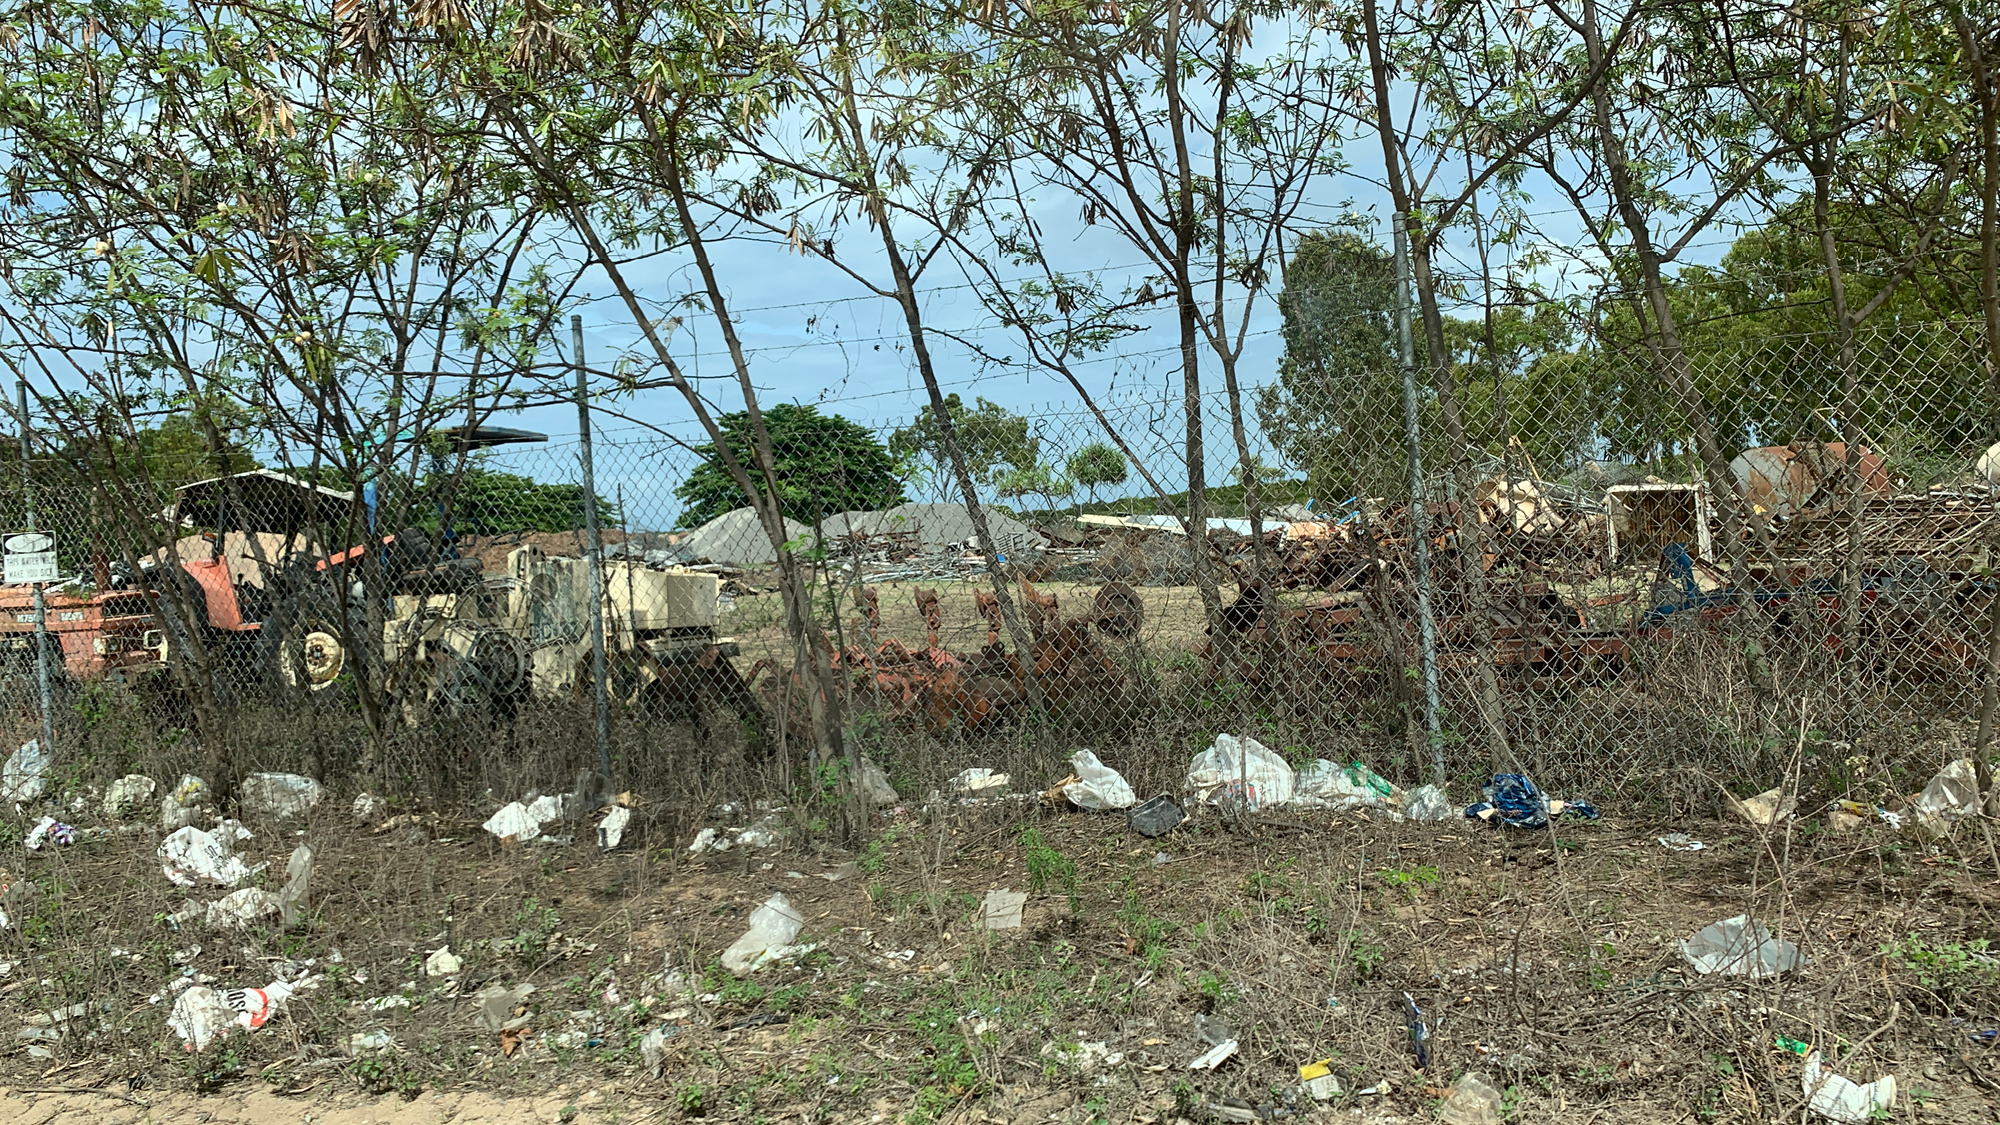 Rubbish, plastic bags scattered along fence